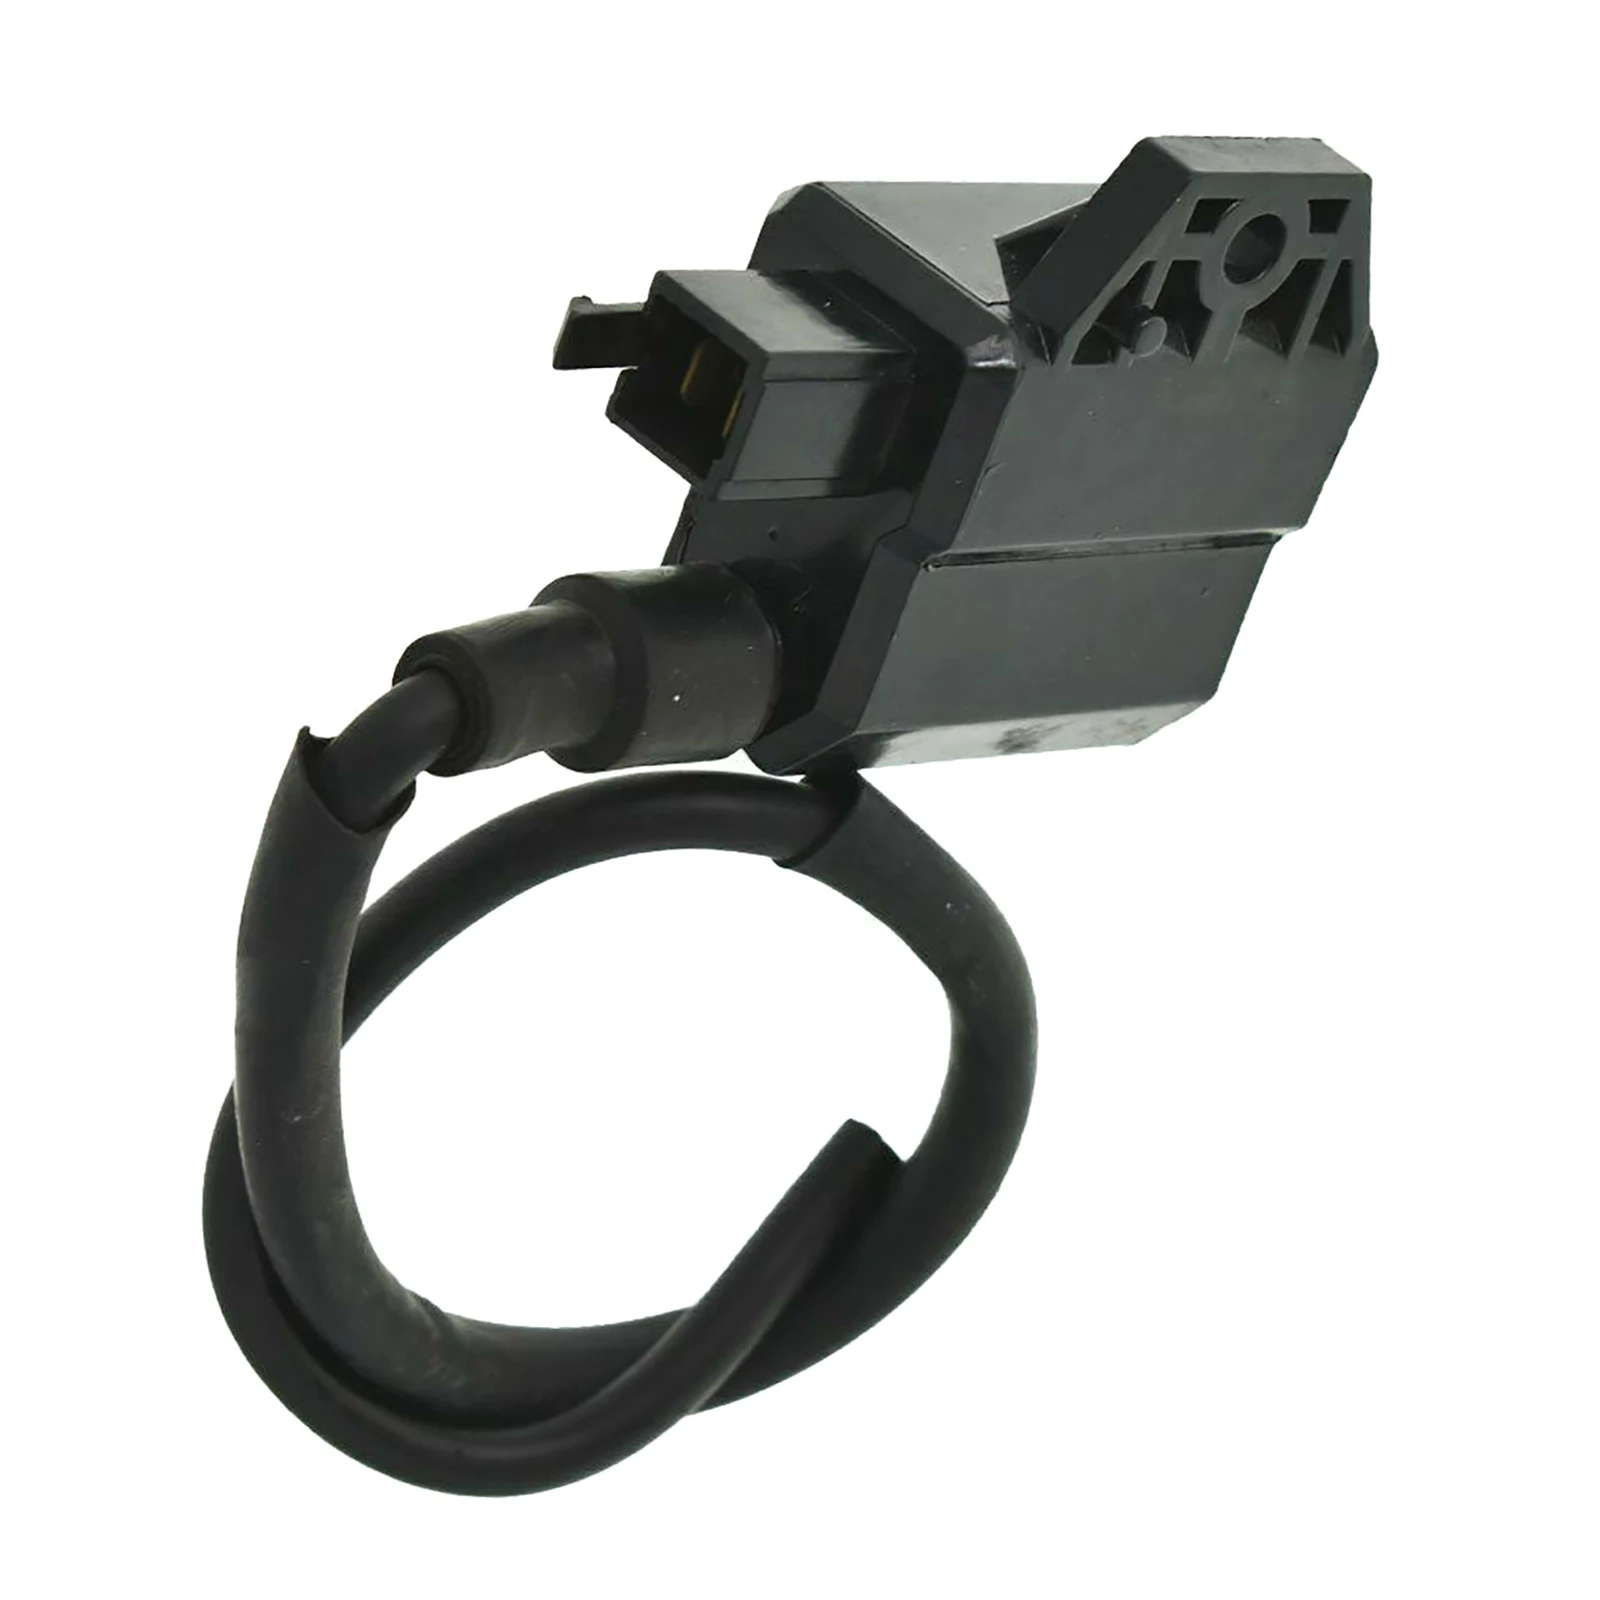 Cdi Unit Ignition Coil 33410-40B00 Spare Parts Replaces Fit for Suzuki LT80 LT 80 ATV Professional Easy to Install Accessories